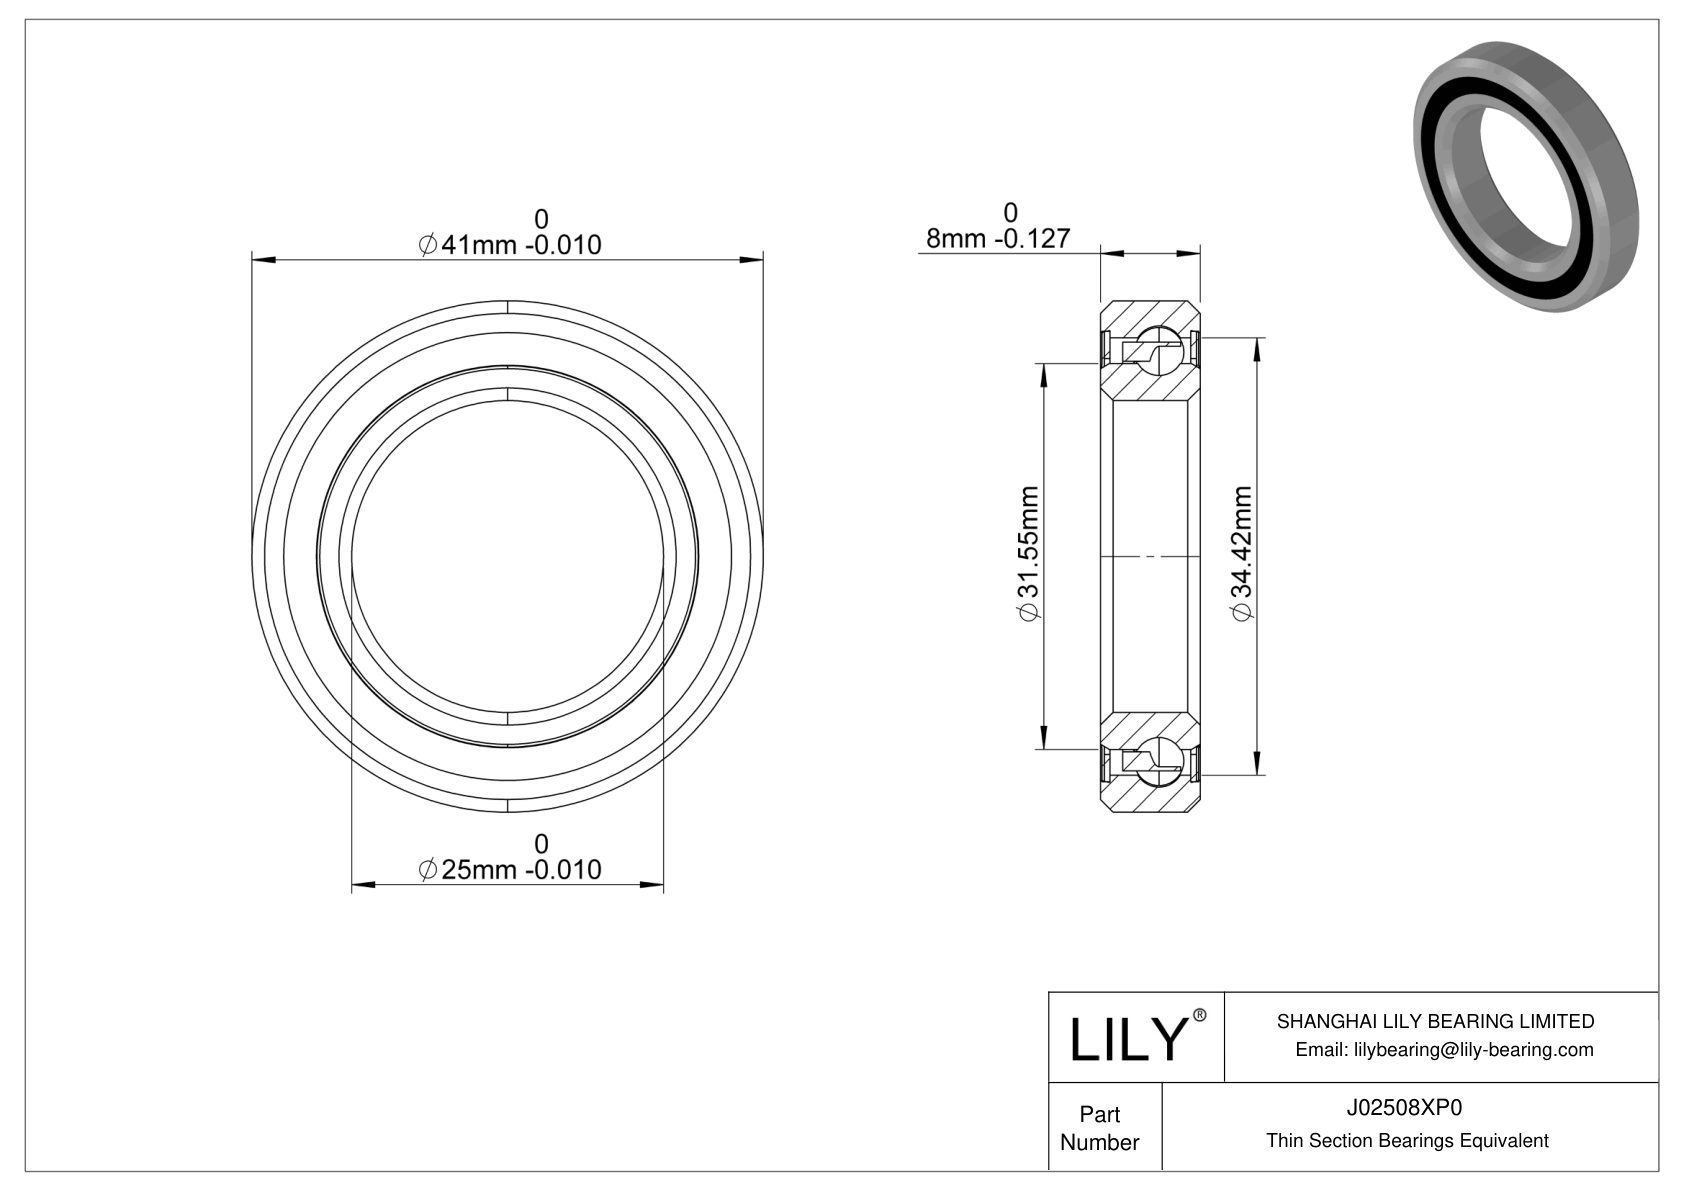 J02508XP0 Constant Section (CS) Bearings cad drawing